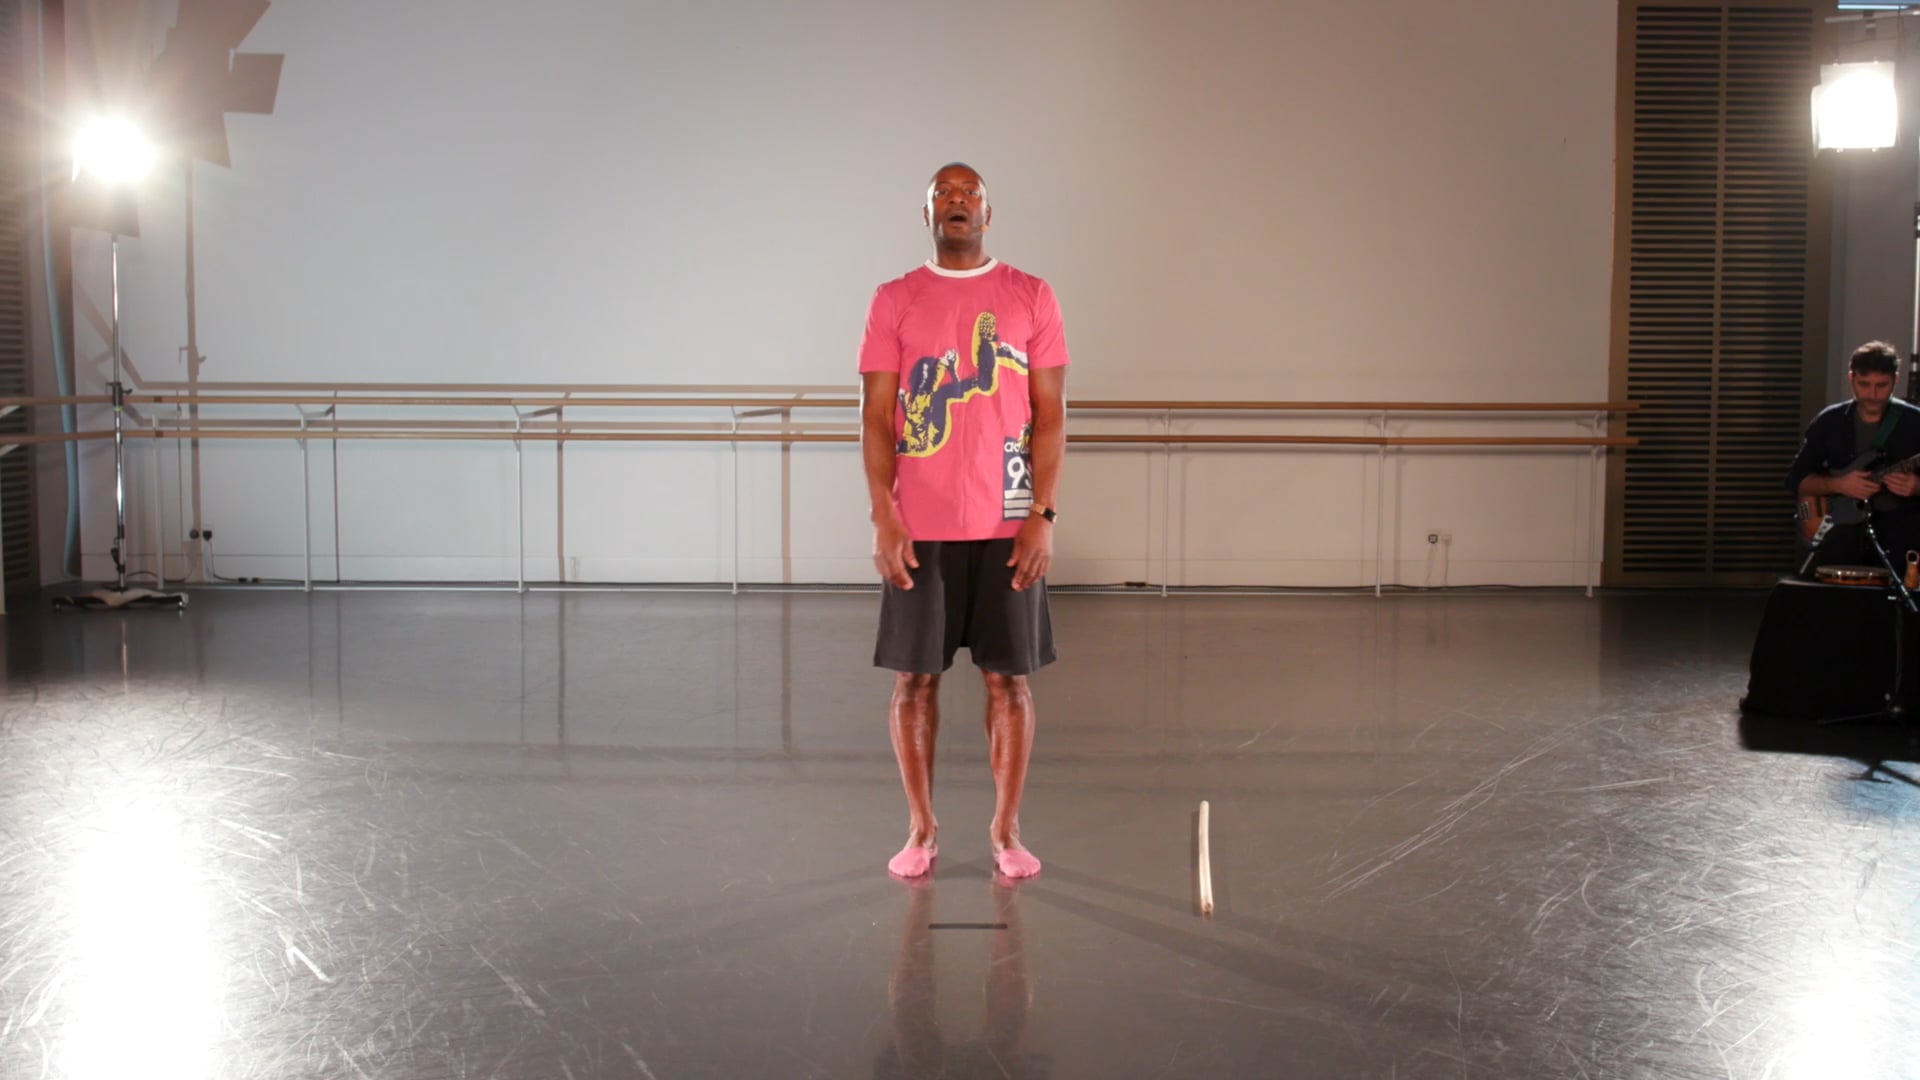 a man in a pink shirt standing in a room.